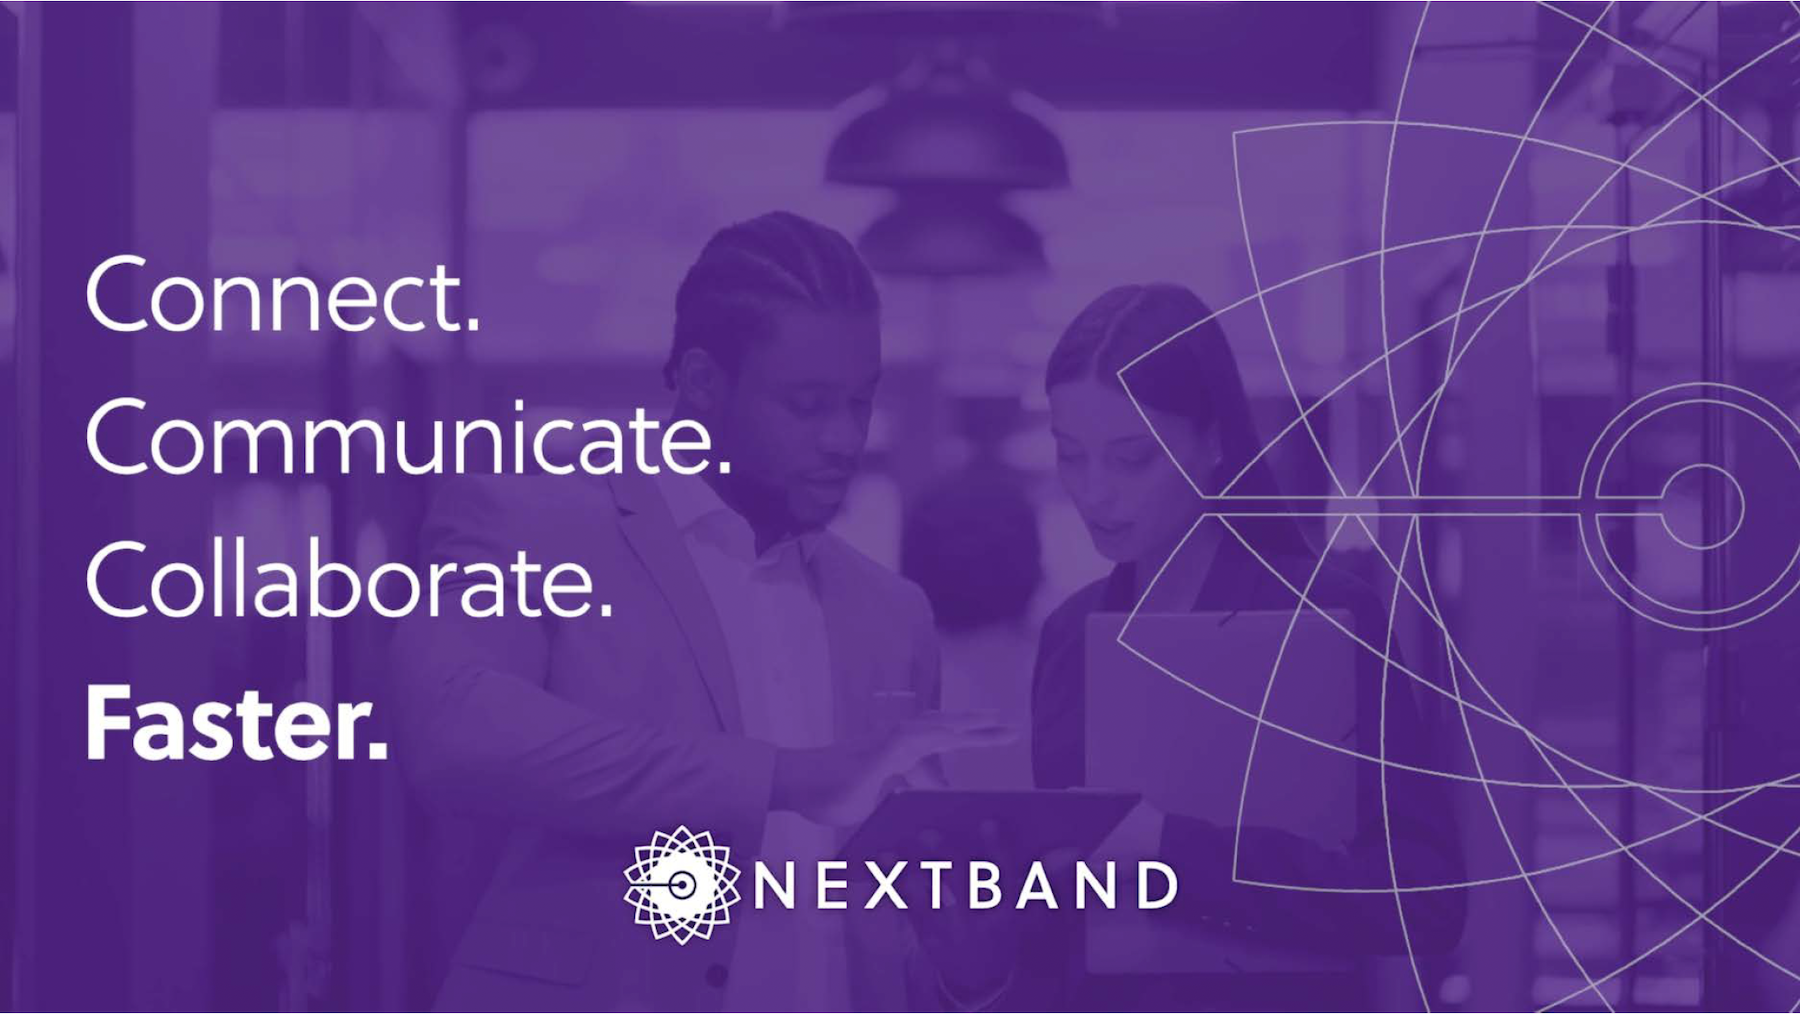 Video still with the words: Connect. Communicate. Collaborate. Faster. NEXTBAND